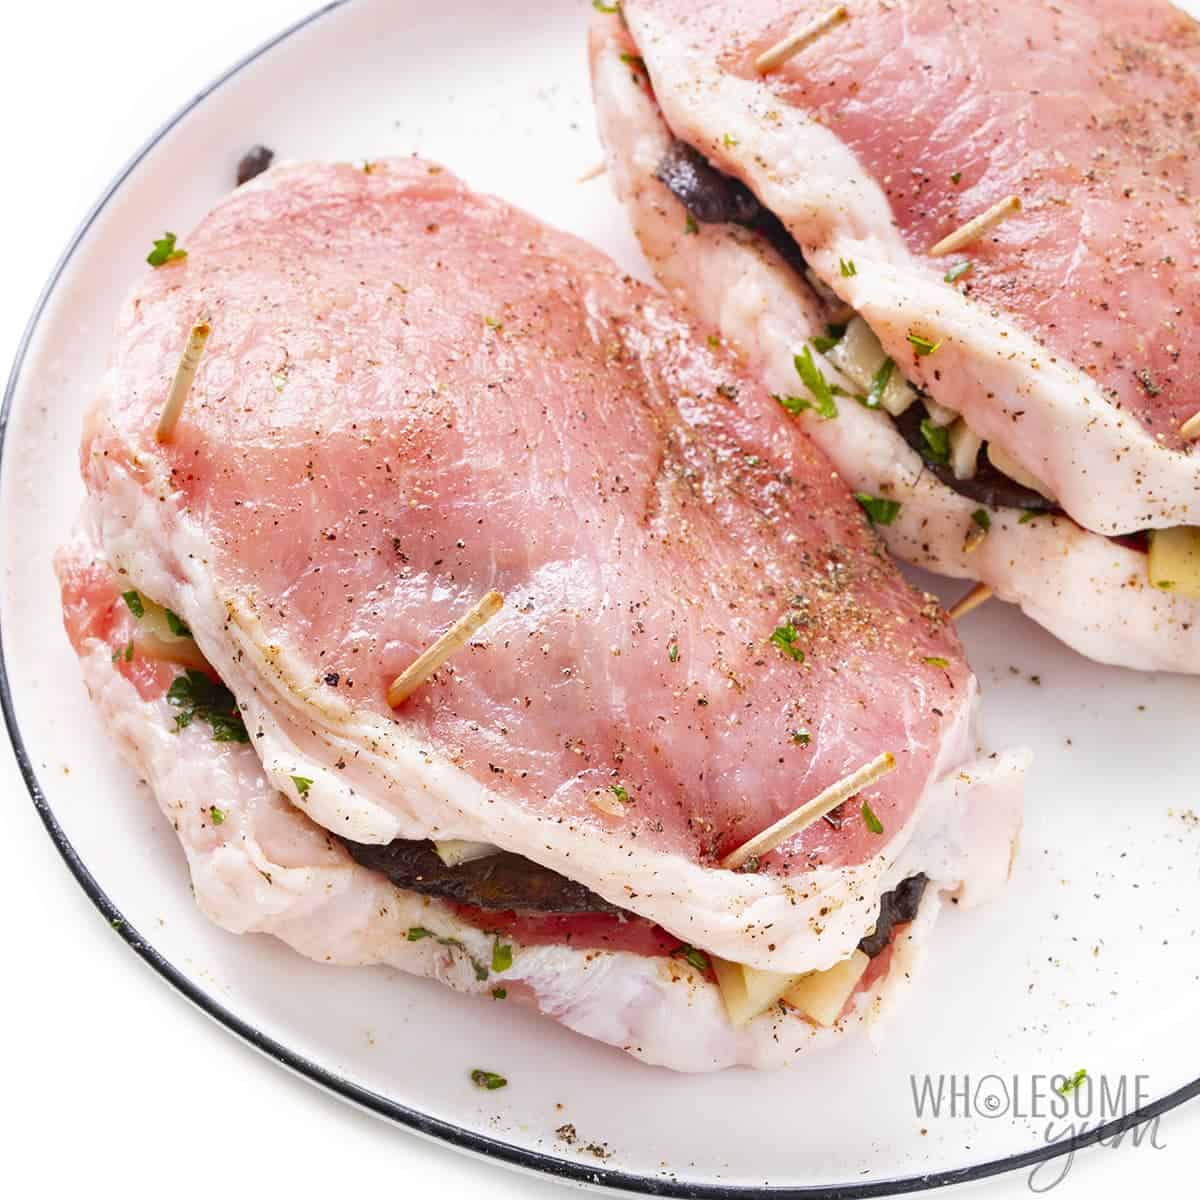 Raw pork chops stuffed with toothpicks to secure.